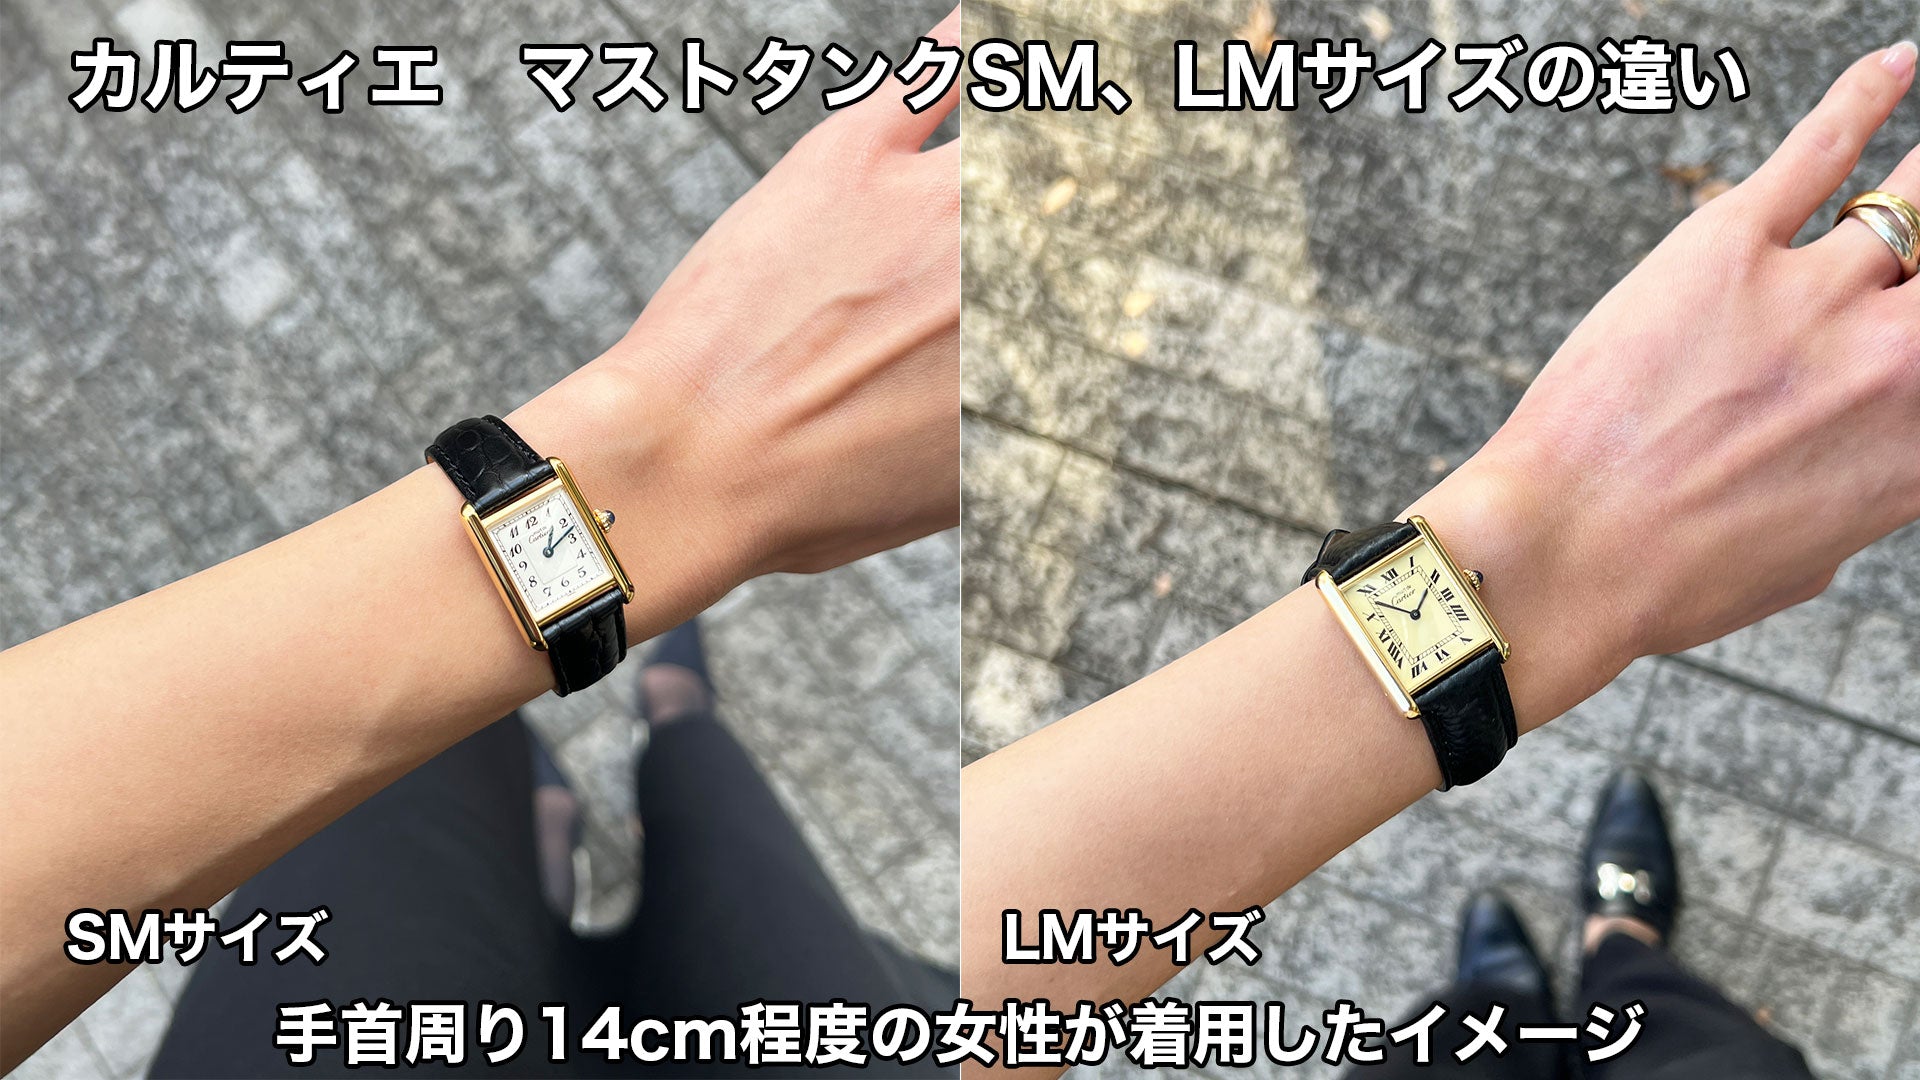 Cartier Watches: Differences between Mast Tank SM and LM when worn by women